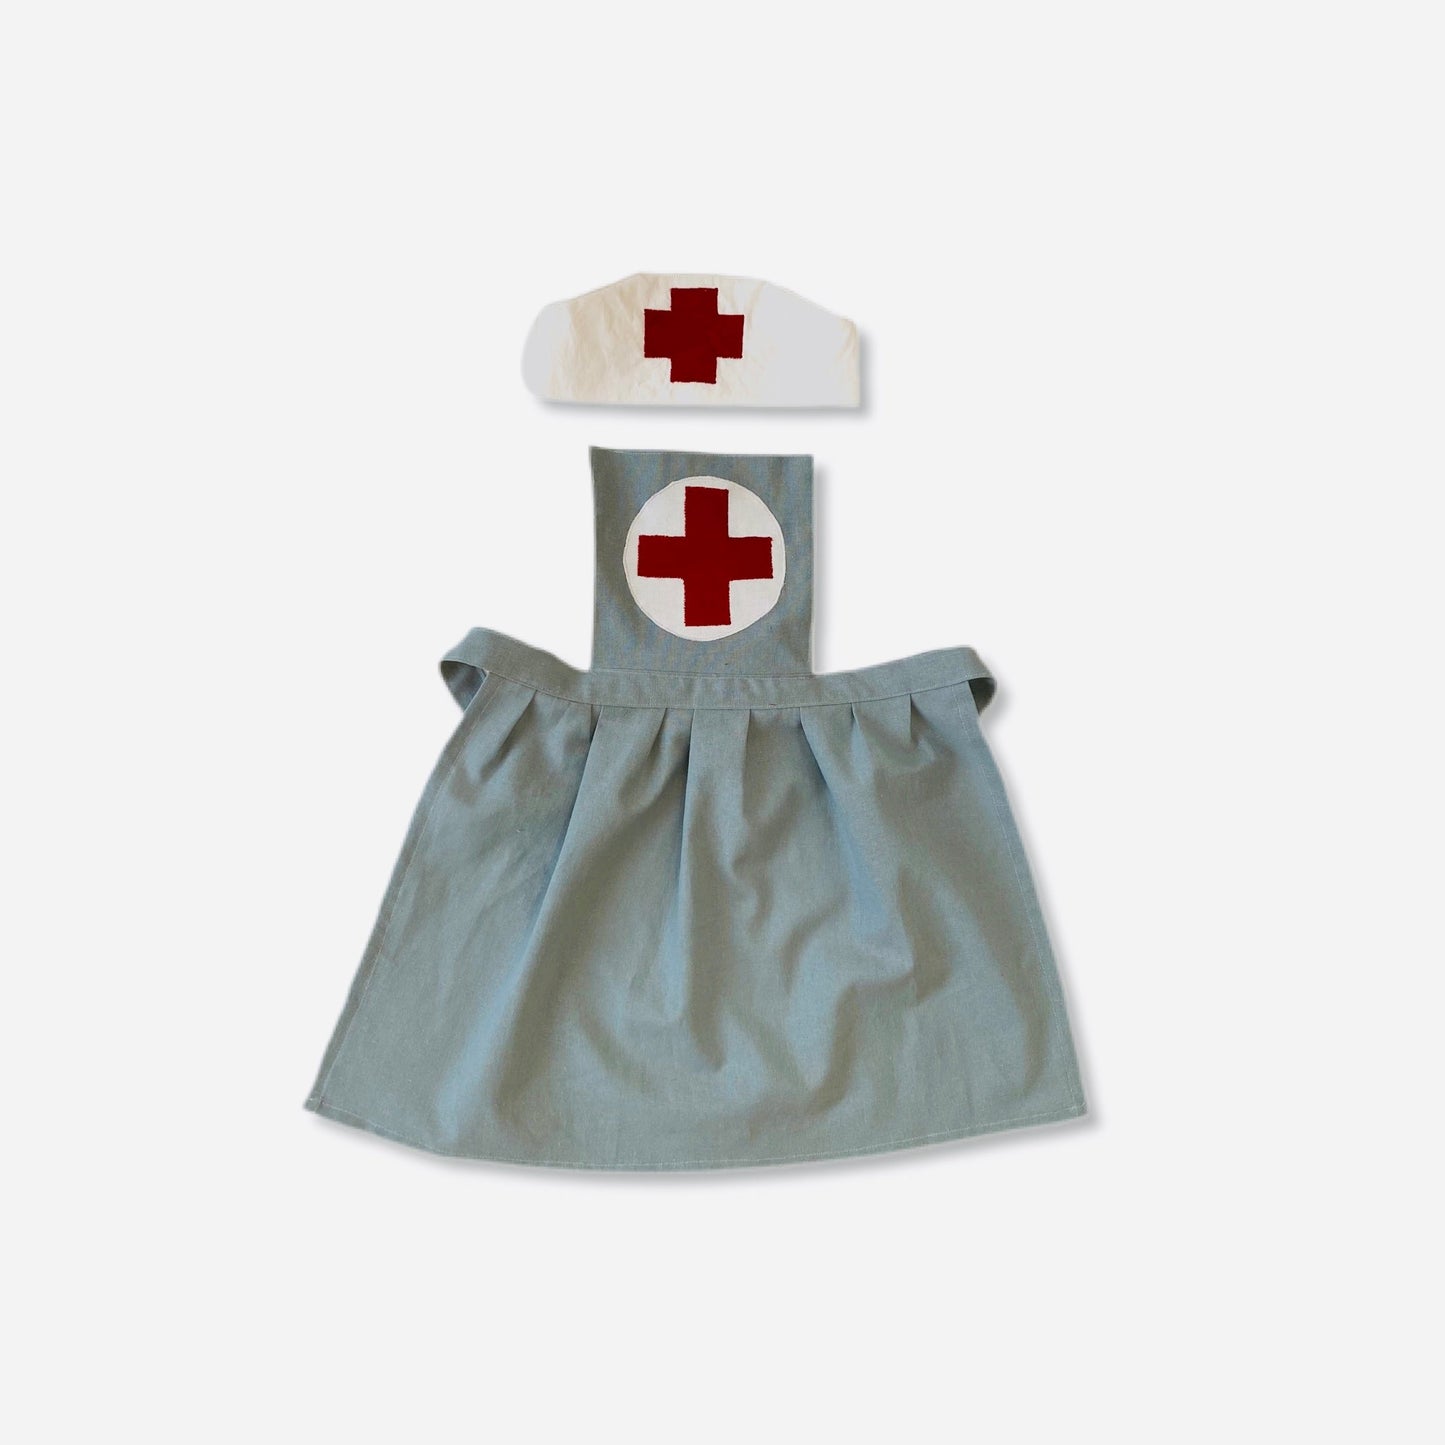 Blue nurse apron and hat for children's doctor dress up game